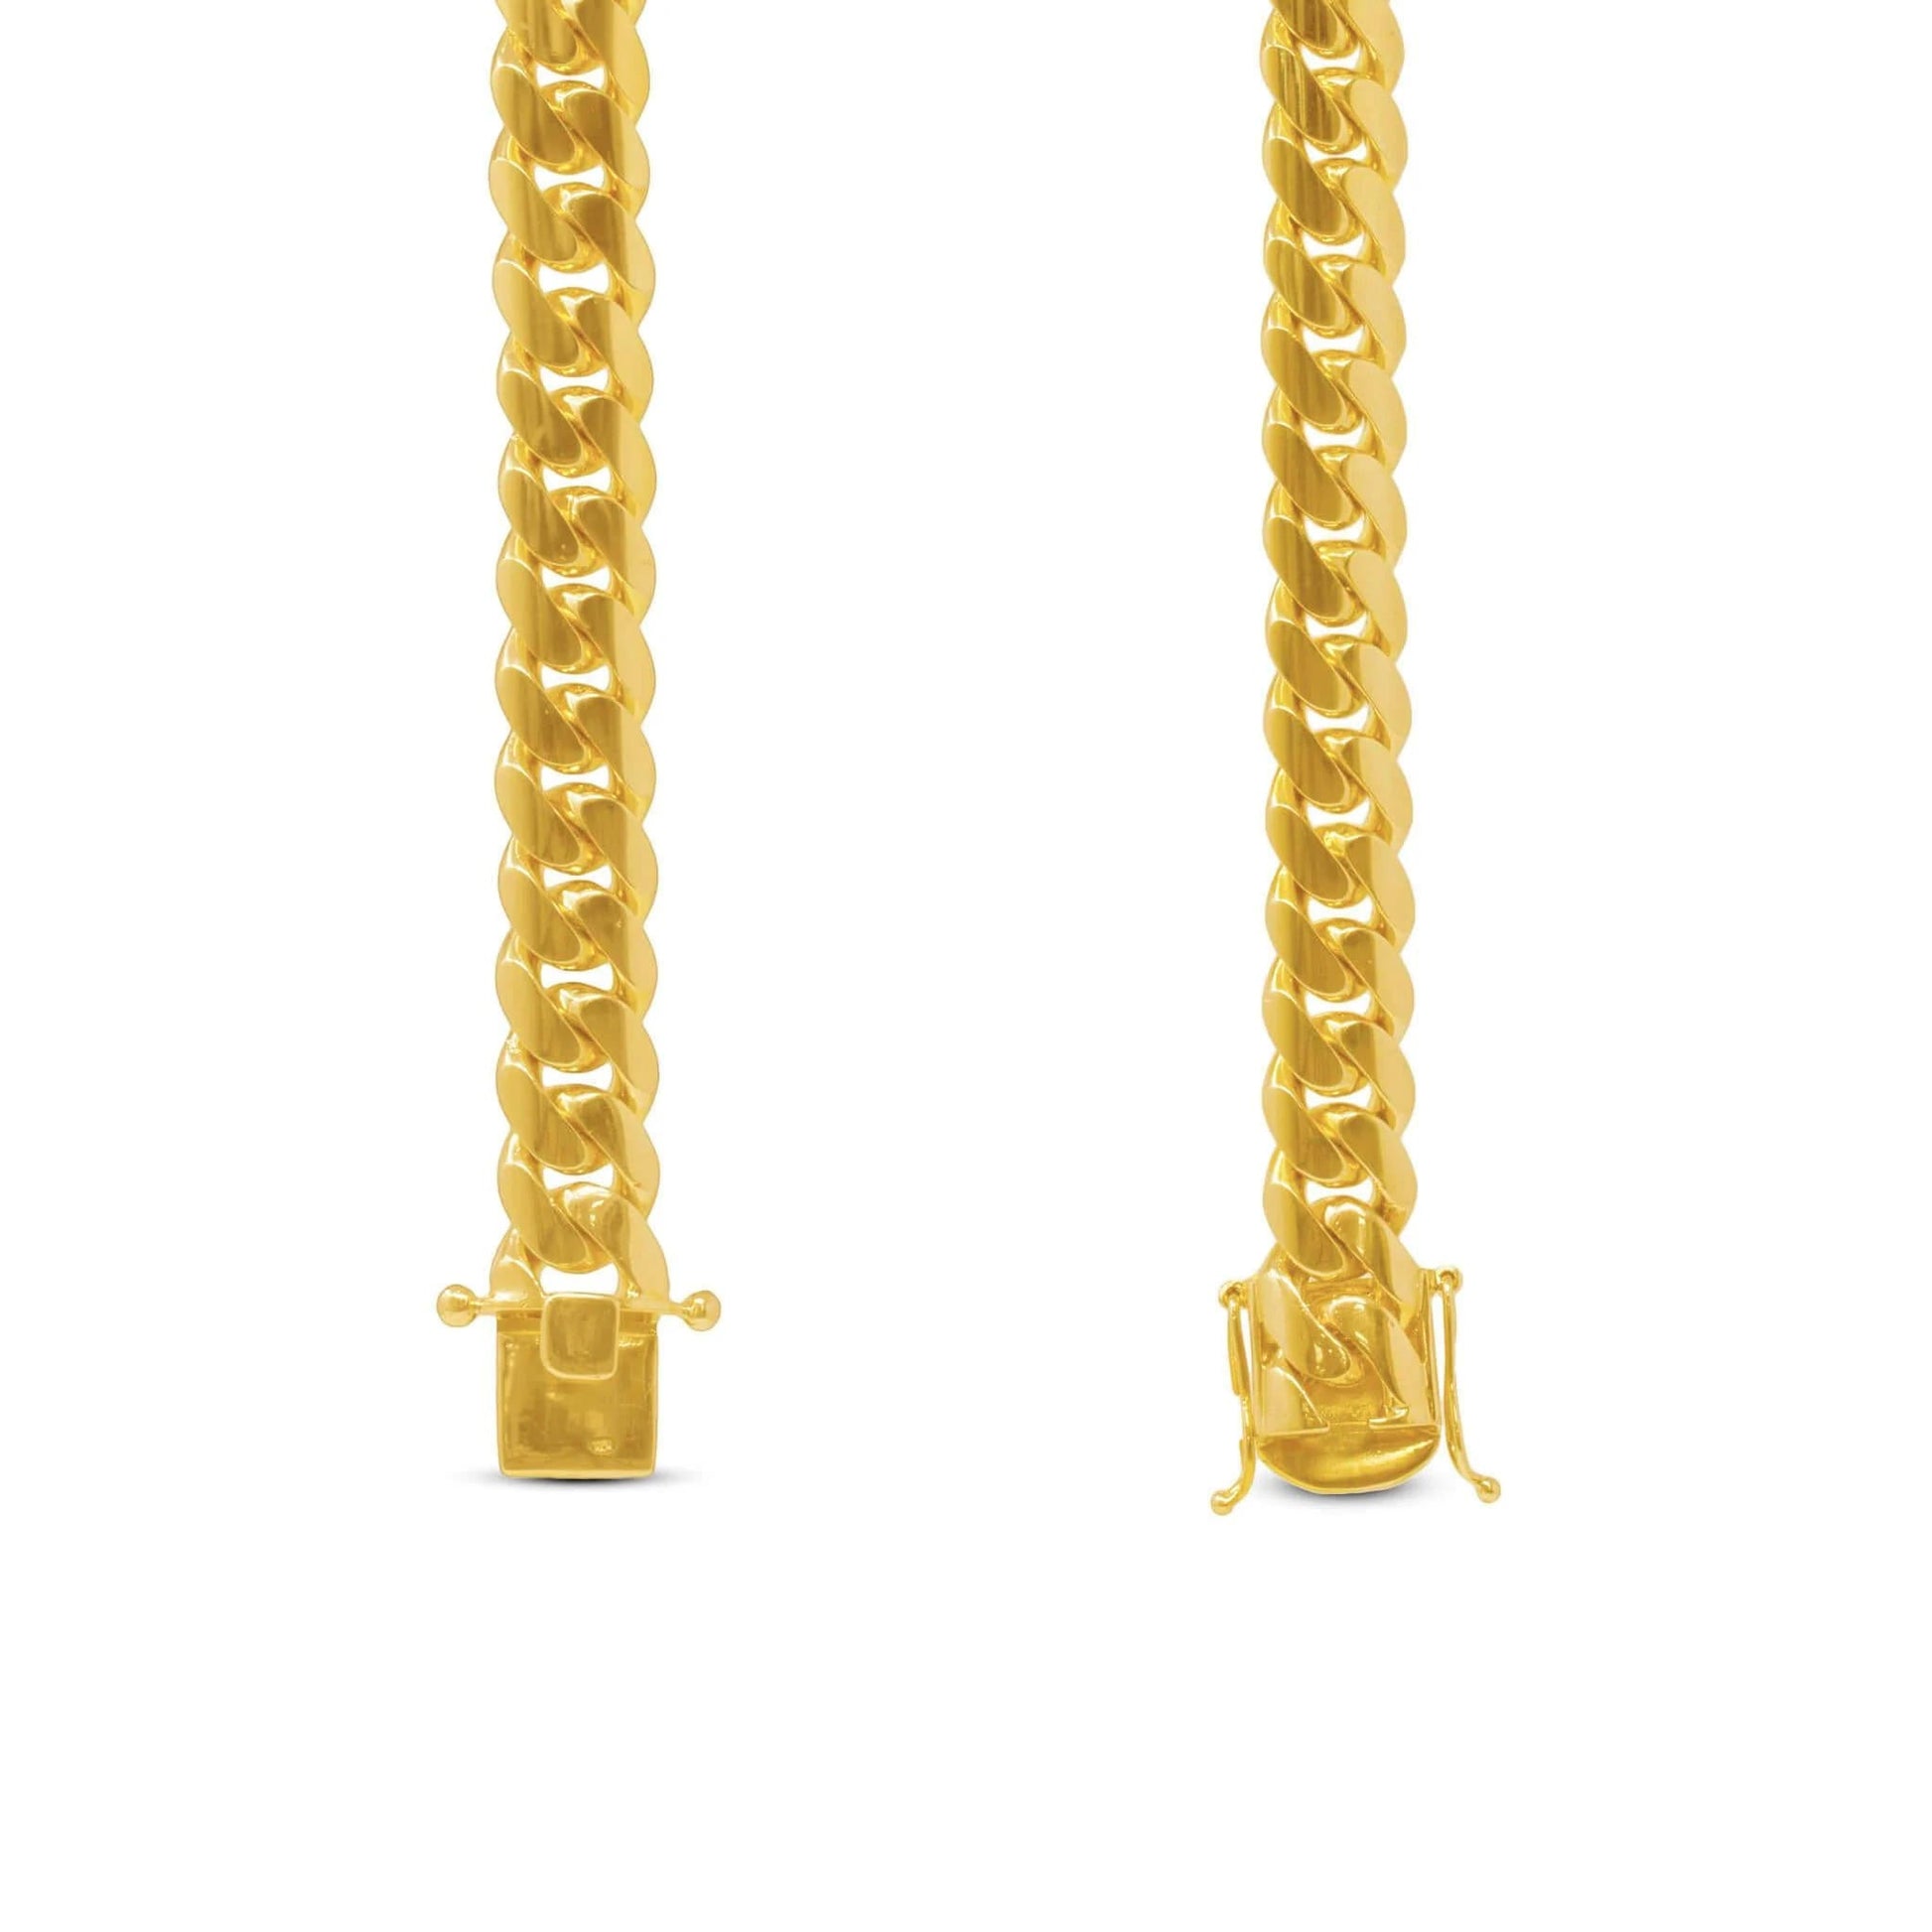 19mm Miami Cuban Link Bracelet in 14K Solid Yellow Gold - Vera Jewelry in Miami